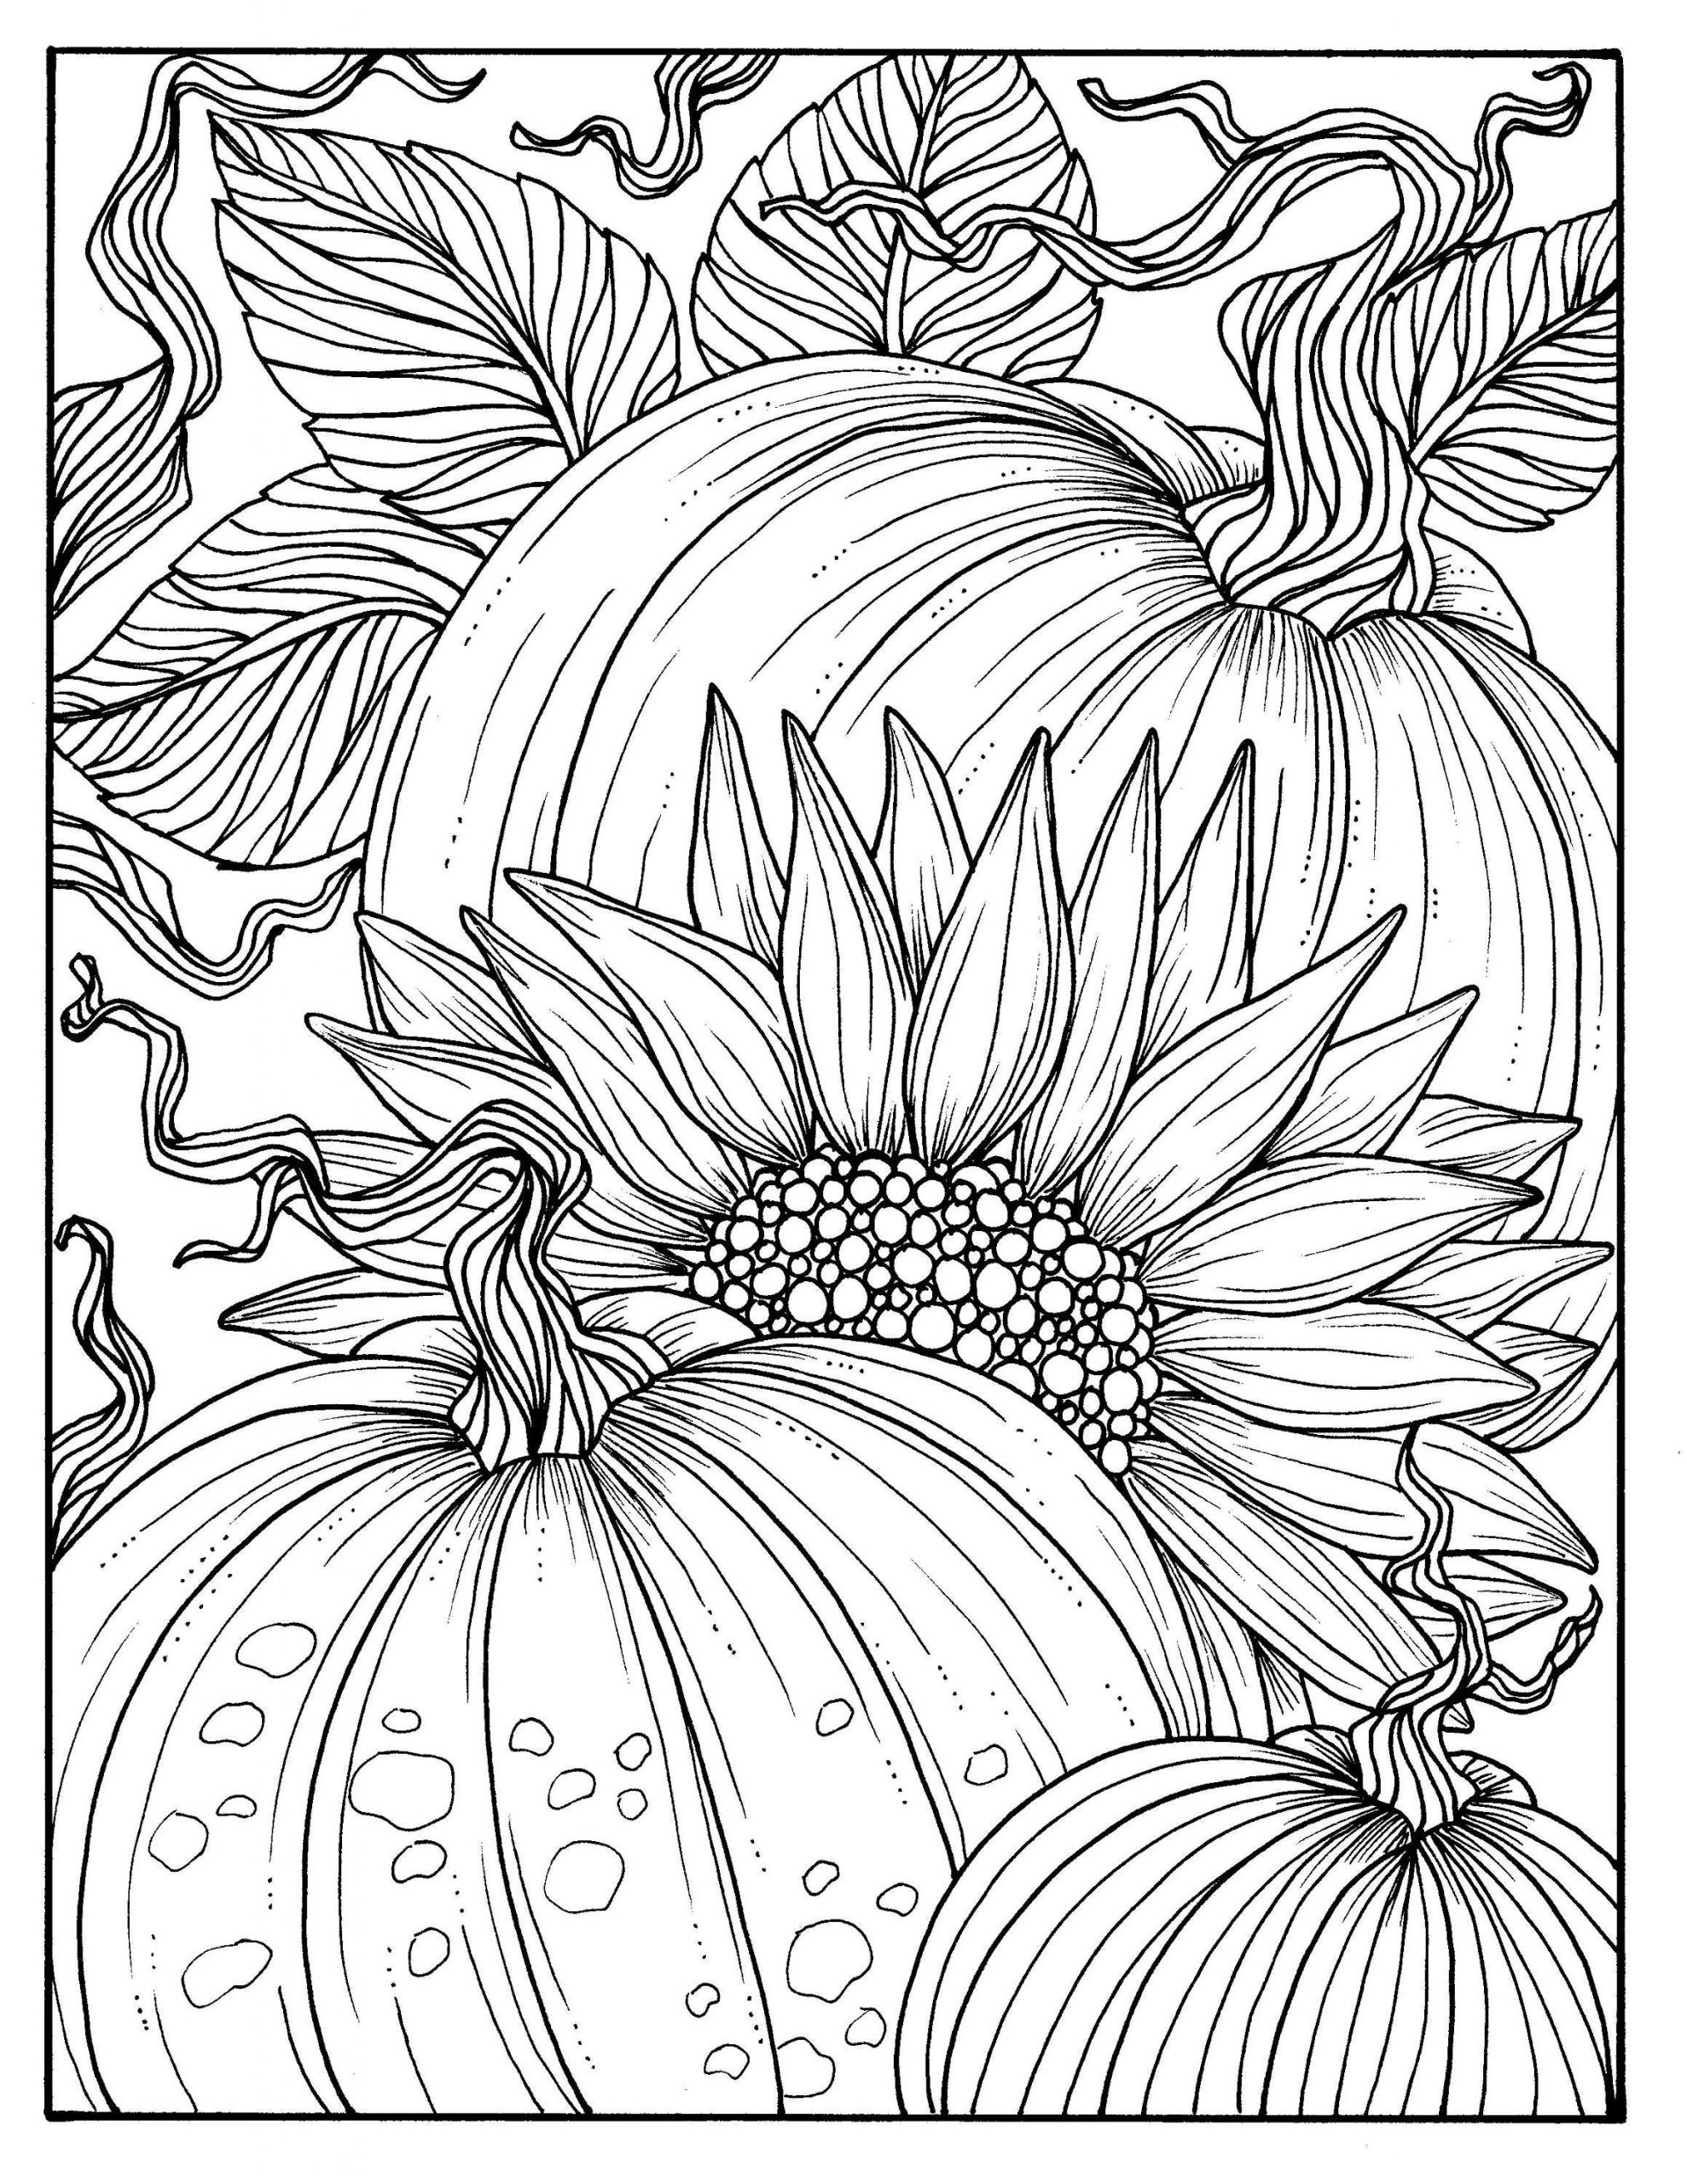 Fall Printables Coloring Pages
 5 Pages Fabulous Fall Digital Downloads to Color Punpkins